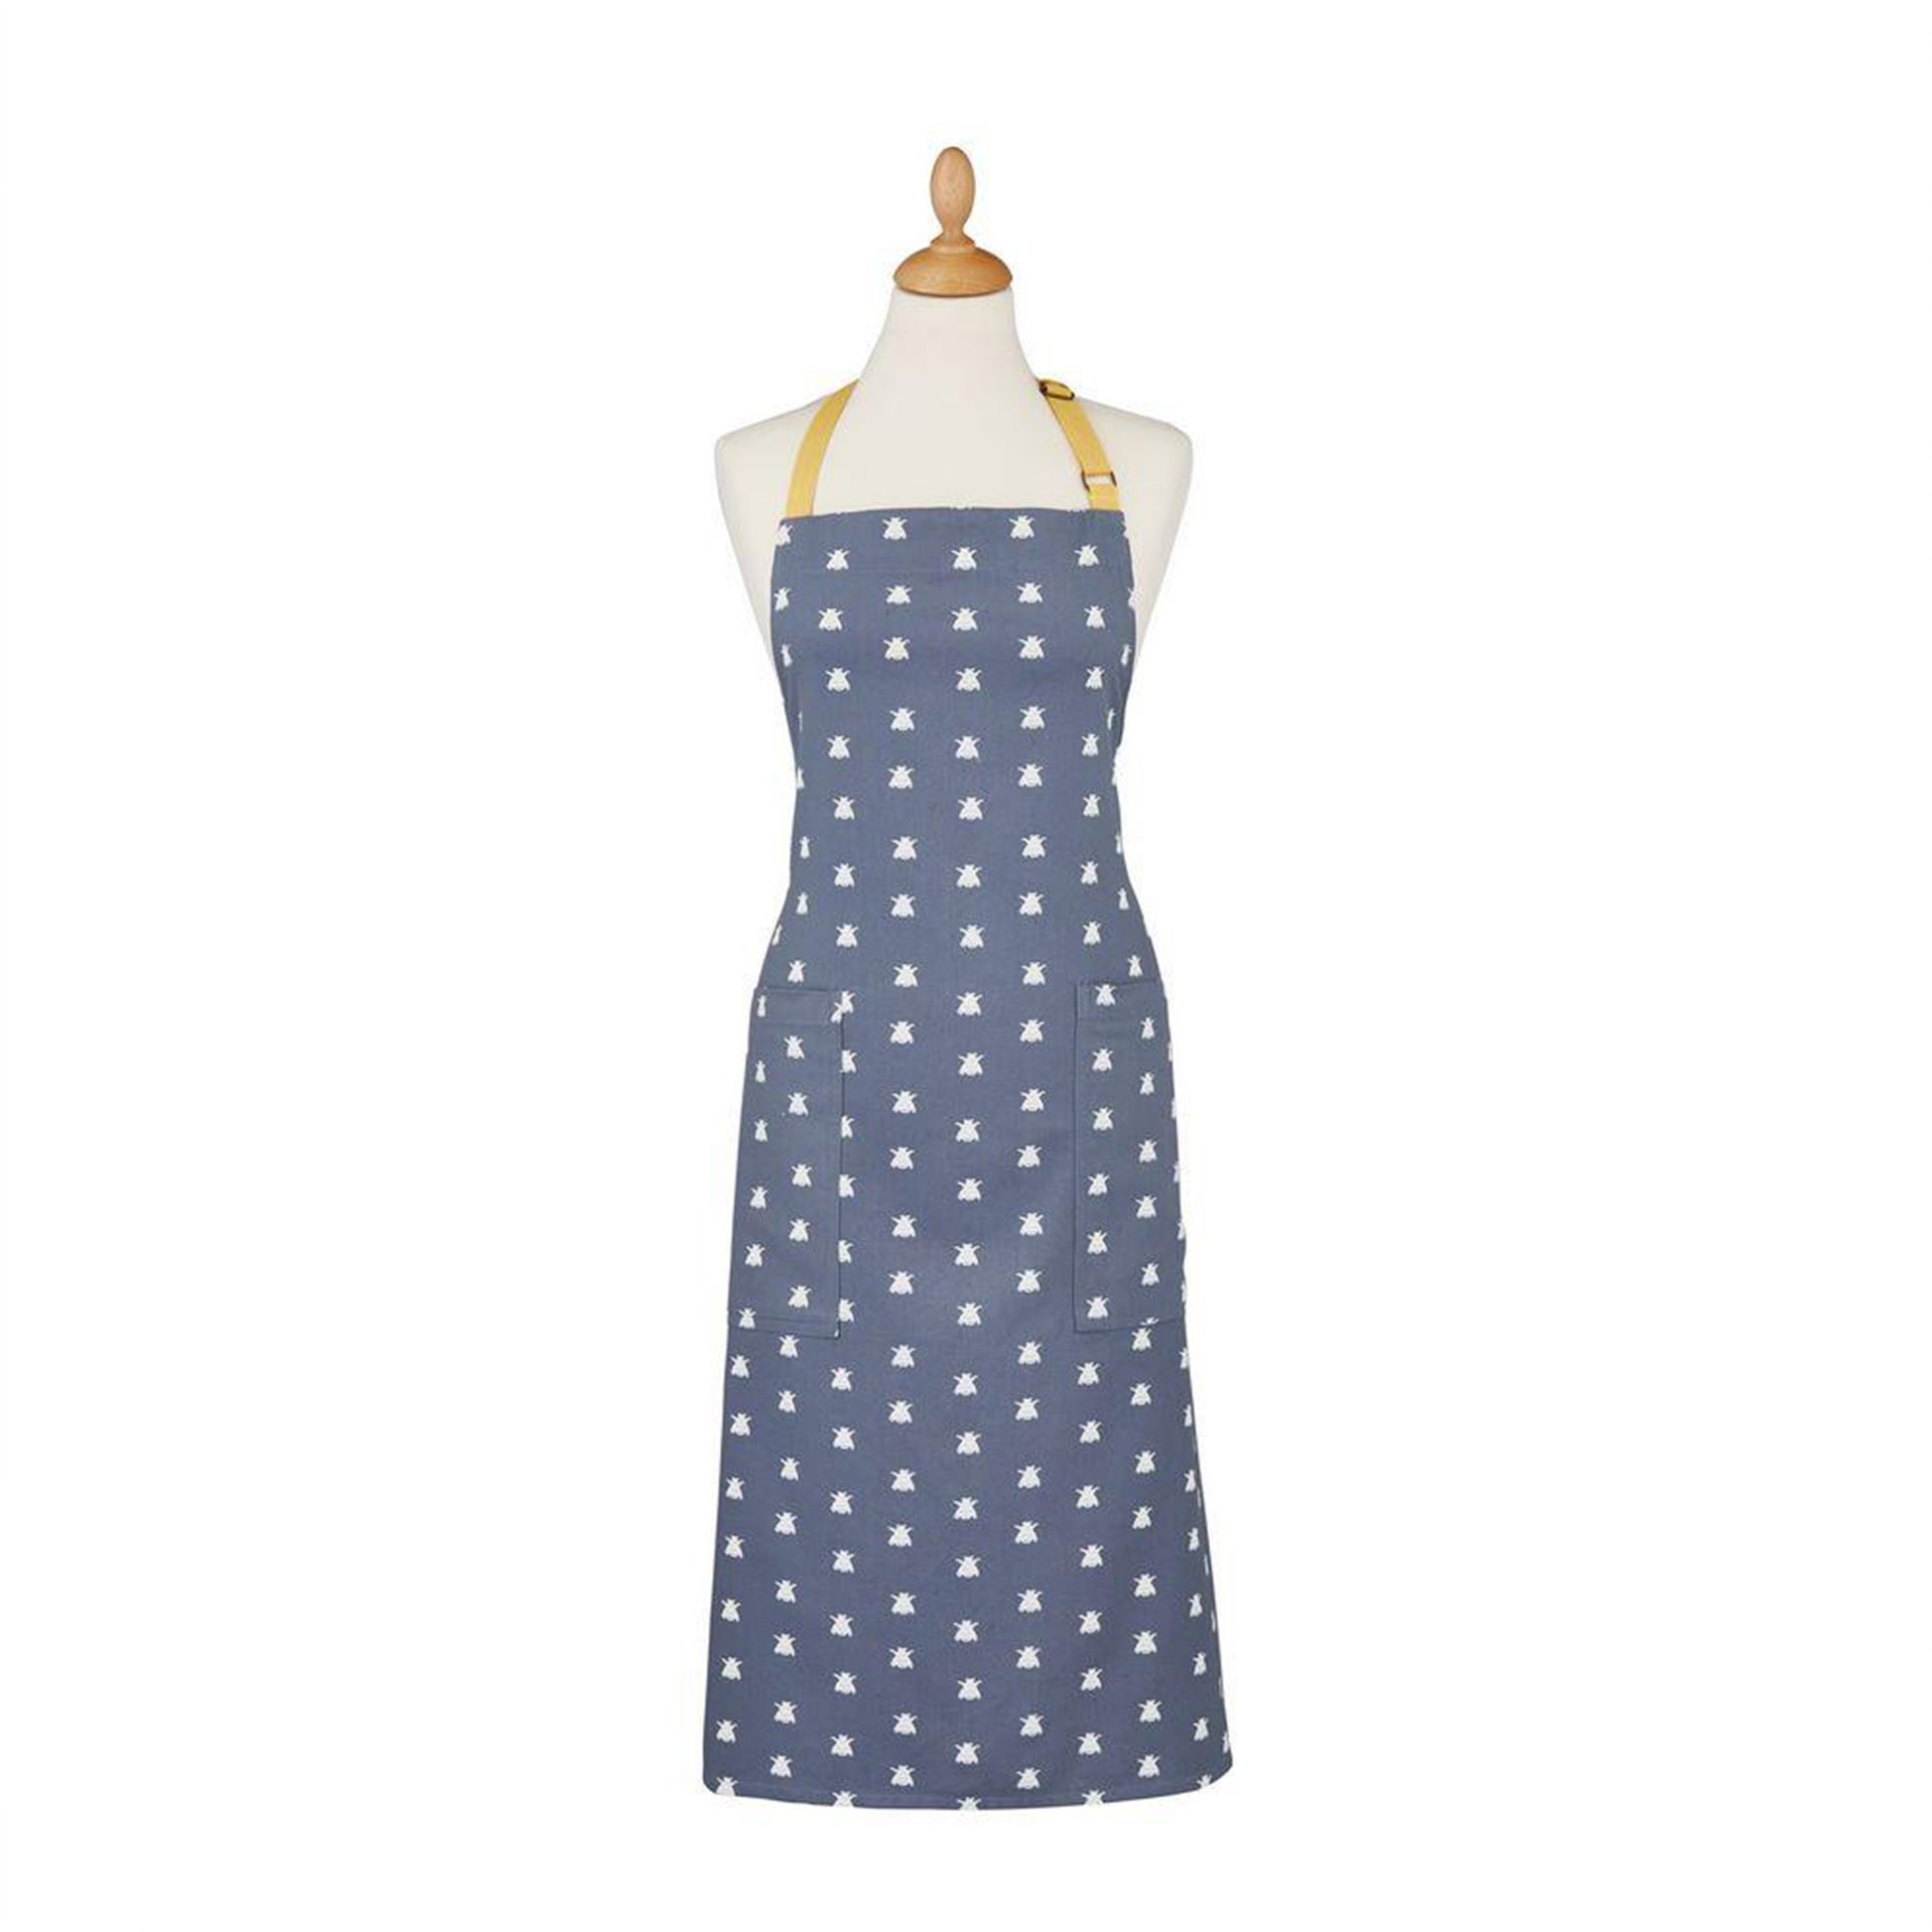 a cotton apron with two front pockets, a blue and white bee pattern and yellow straps